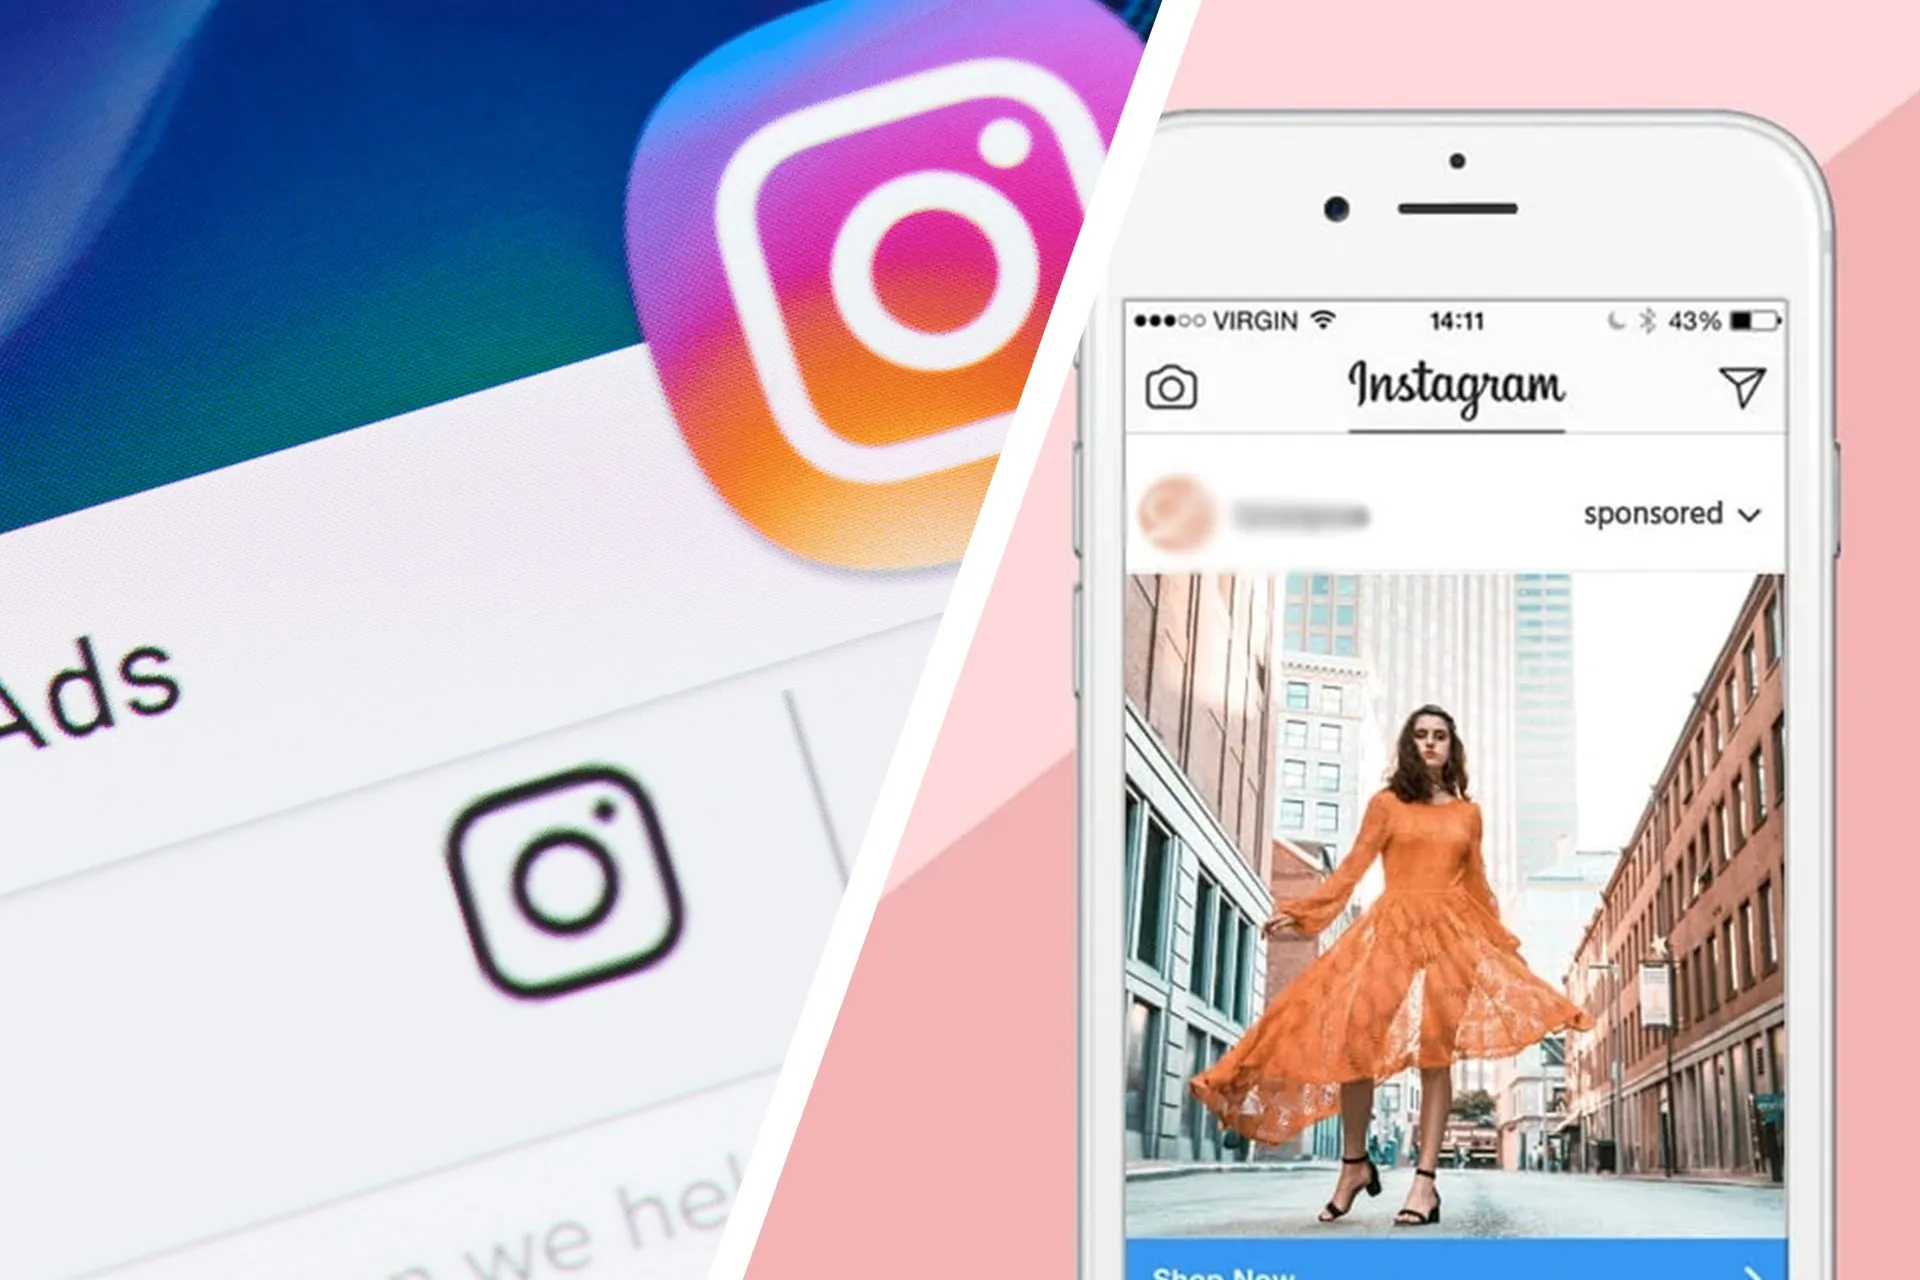 How To Change Ad Account On Instagram?